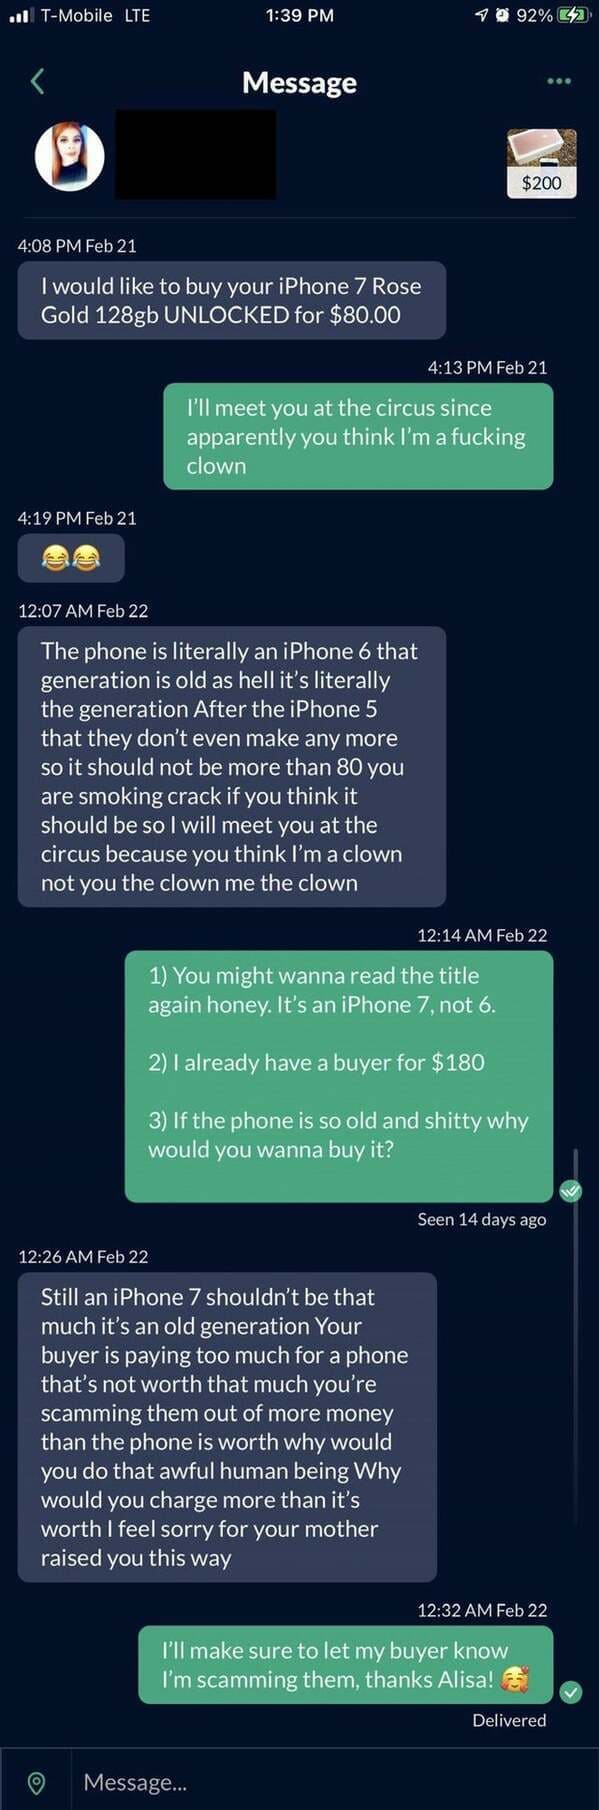 super entitled people - screenshot - .11 TMobile Lte 10 92%C2 Message $200 Feb 21 I would to buy your iPhone 7 Rose Gold 128gb Unlocked for $80.00 Feb 21 I'll meet you at the circus since apparently you think I'm a fucking clown Feb 21 Feb 22 The phone is